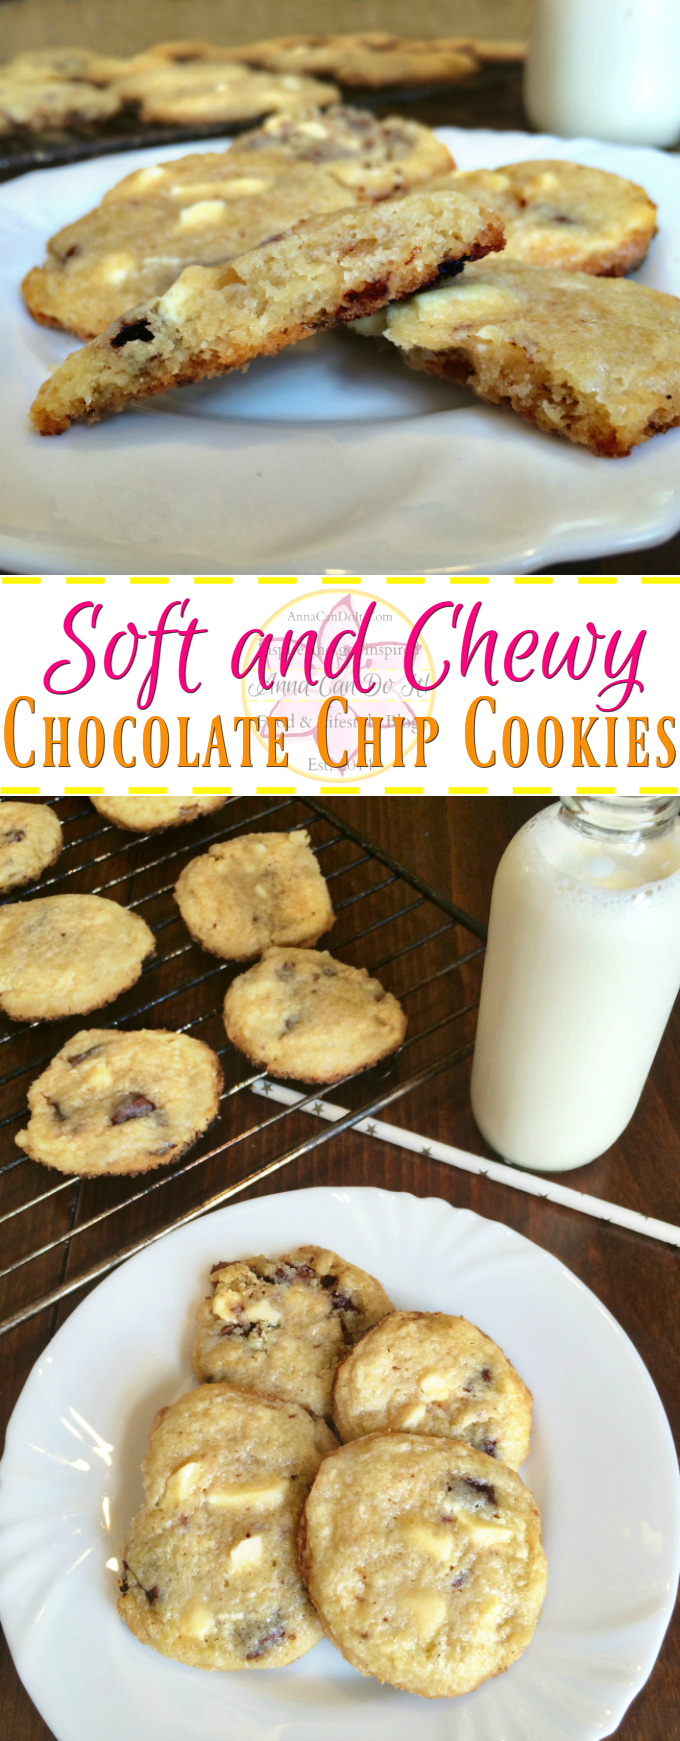 Soft and Chewy Chocolate Chip Cookies - Anna Can Do It! * These Soft and Chewy Chocolate Chip Cookies are causing serious addiction, made with white and dark chocolate. Perfect dessert or snack if you manage to make them without eating the entire bowl of dough!